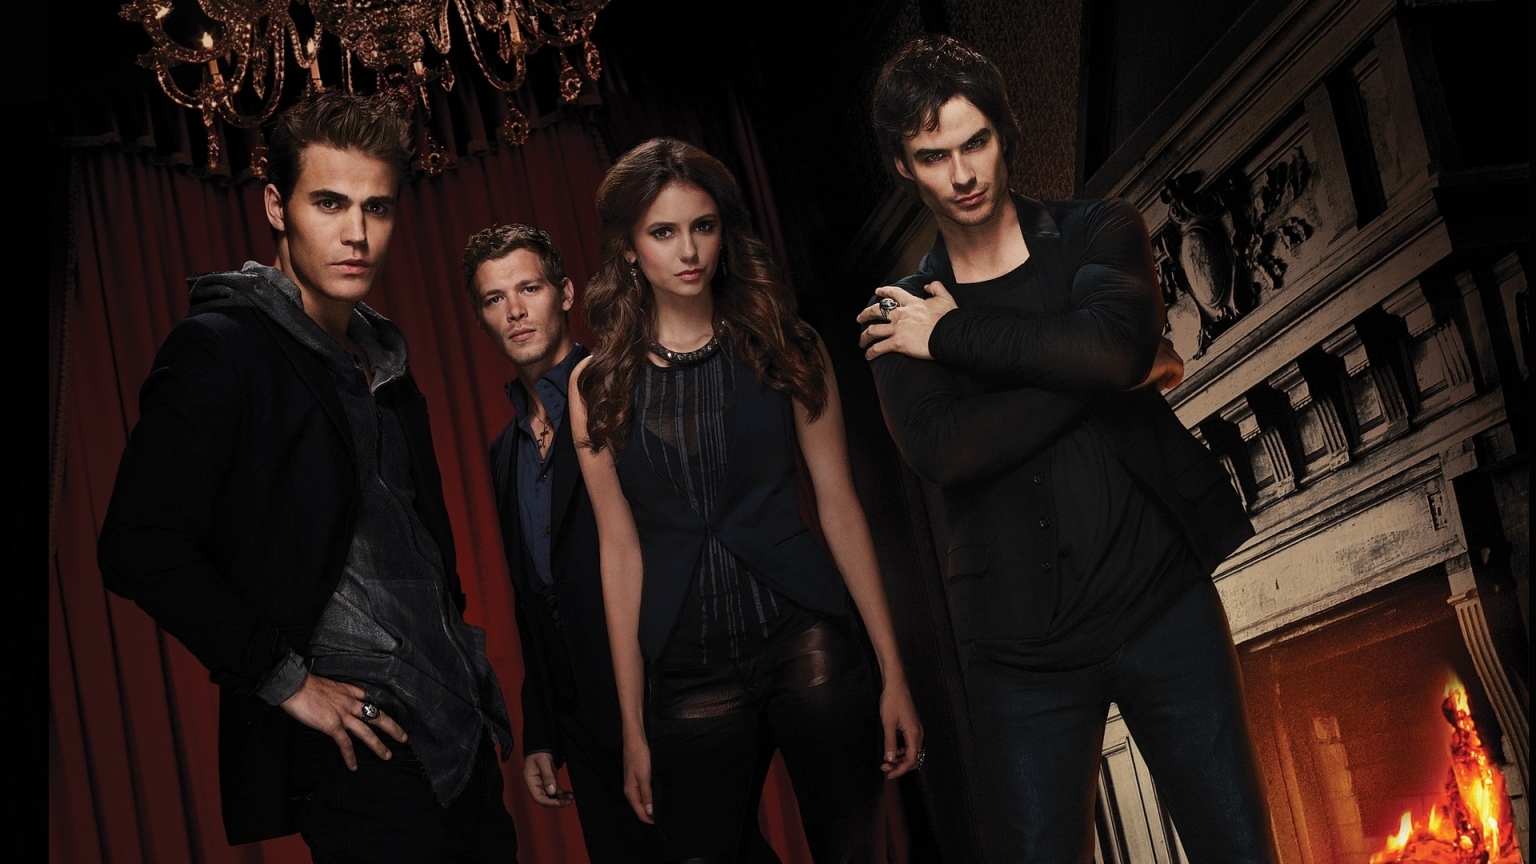 The Vampire Diaries Actors for 1536 x 864 HDTV resolution